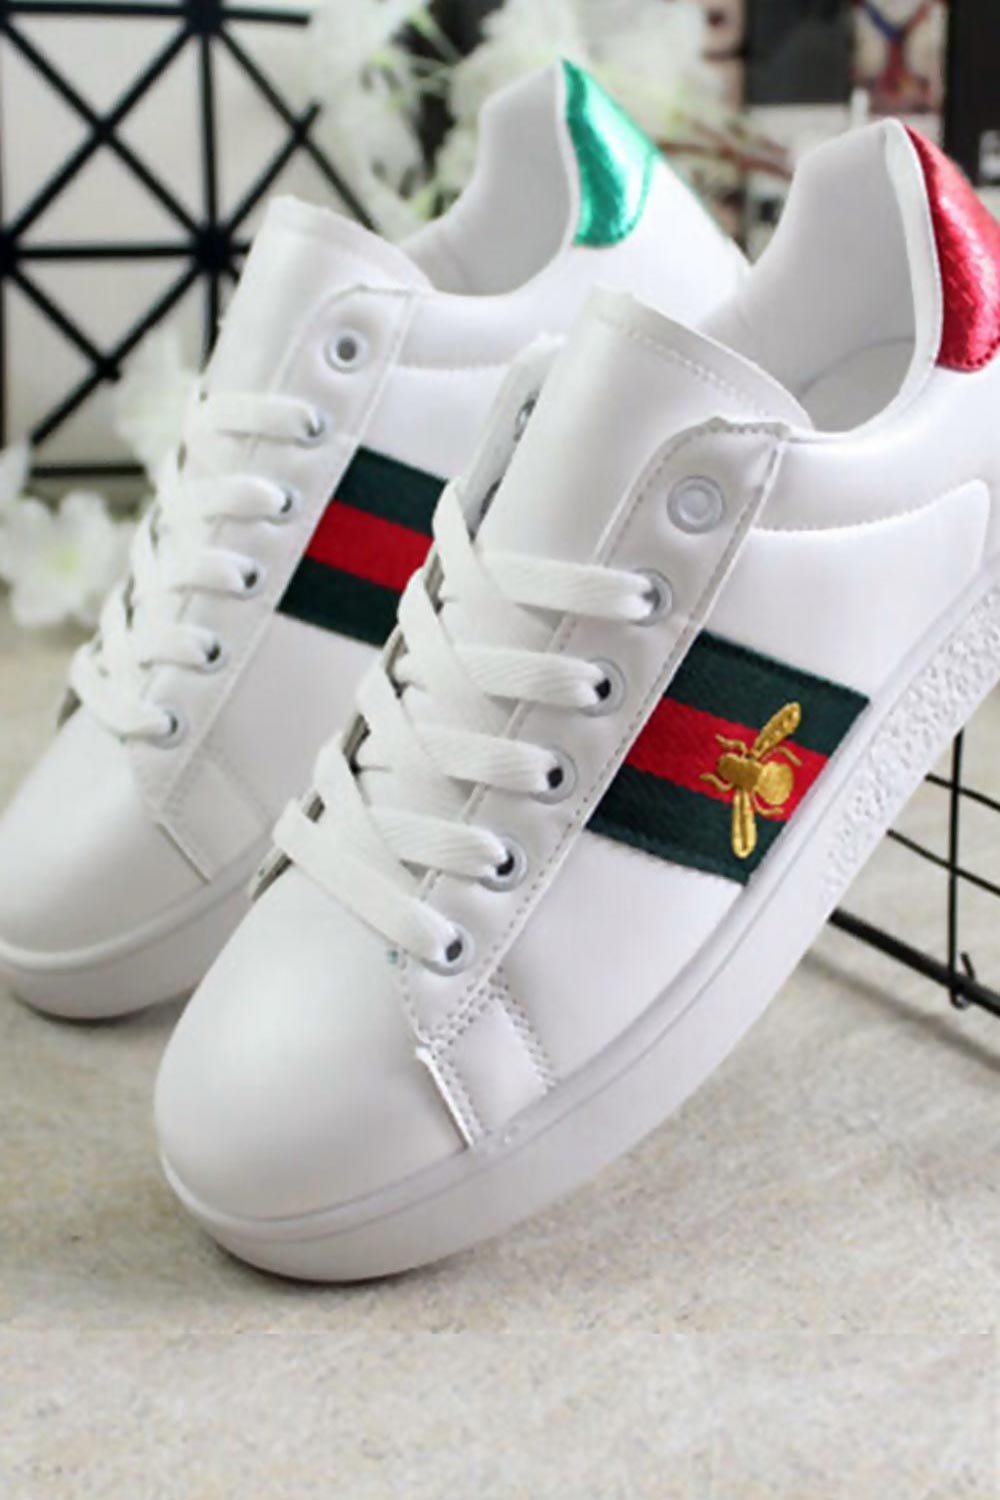 gucci style trainers